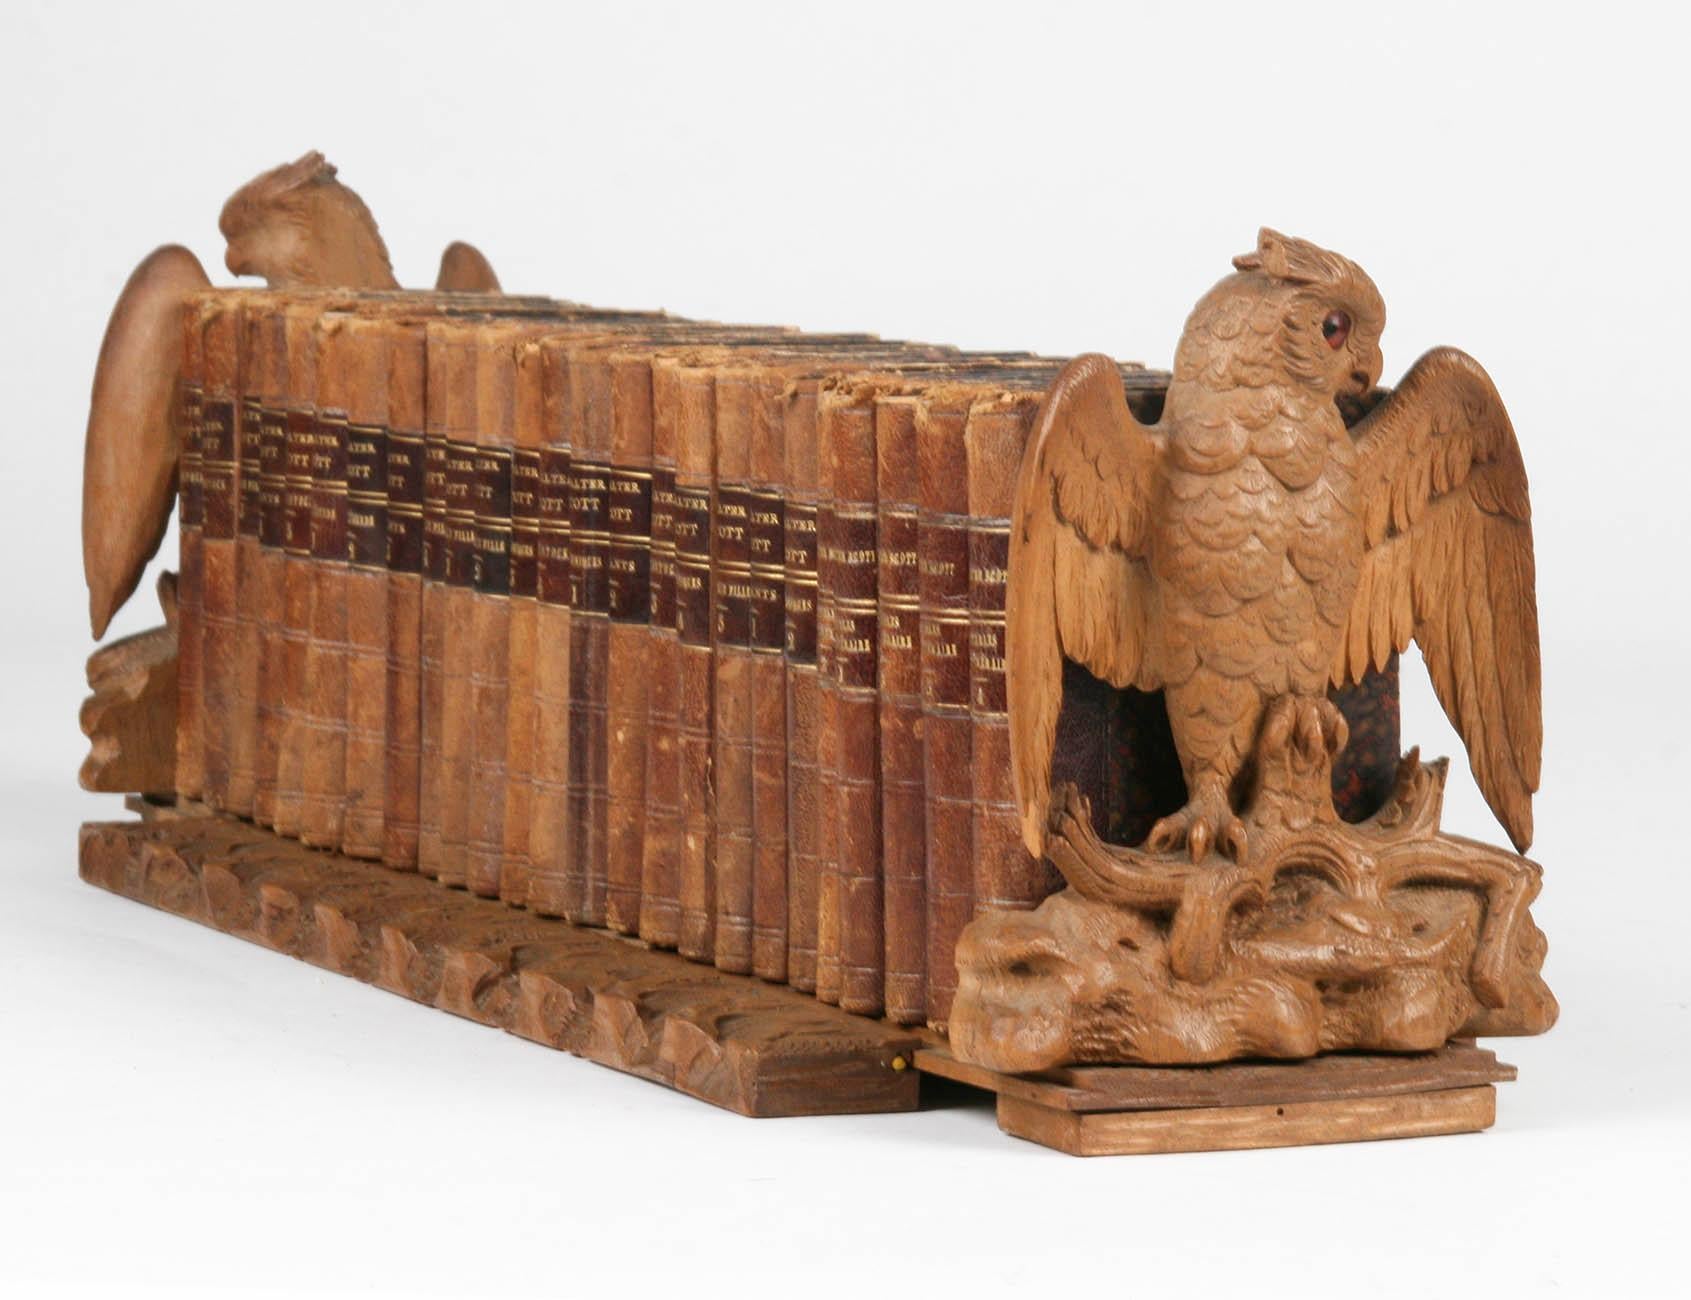 German Bookshelf or Bookends, Black Forest Owls with Leather Covered Books